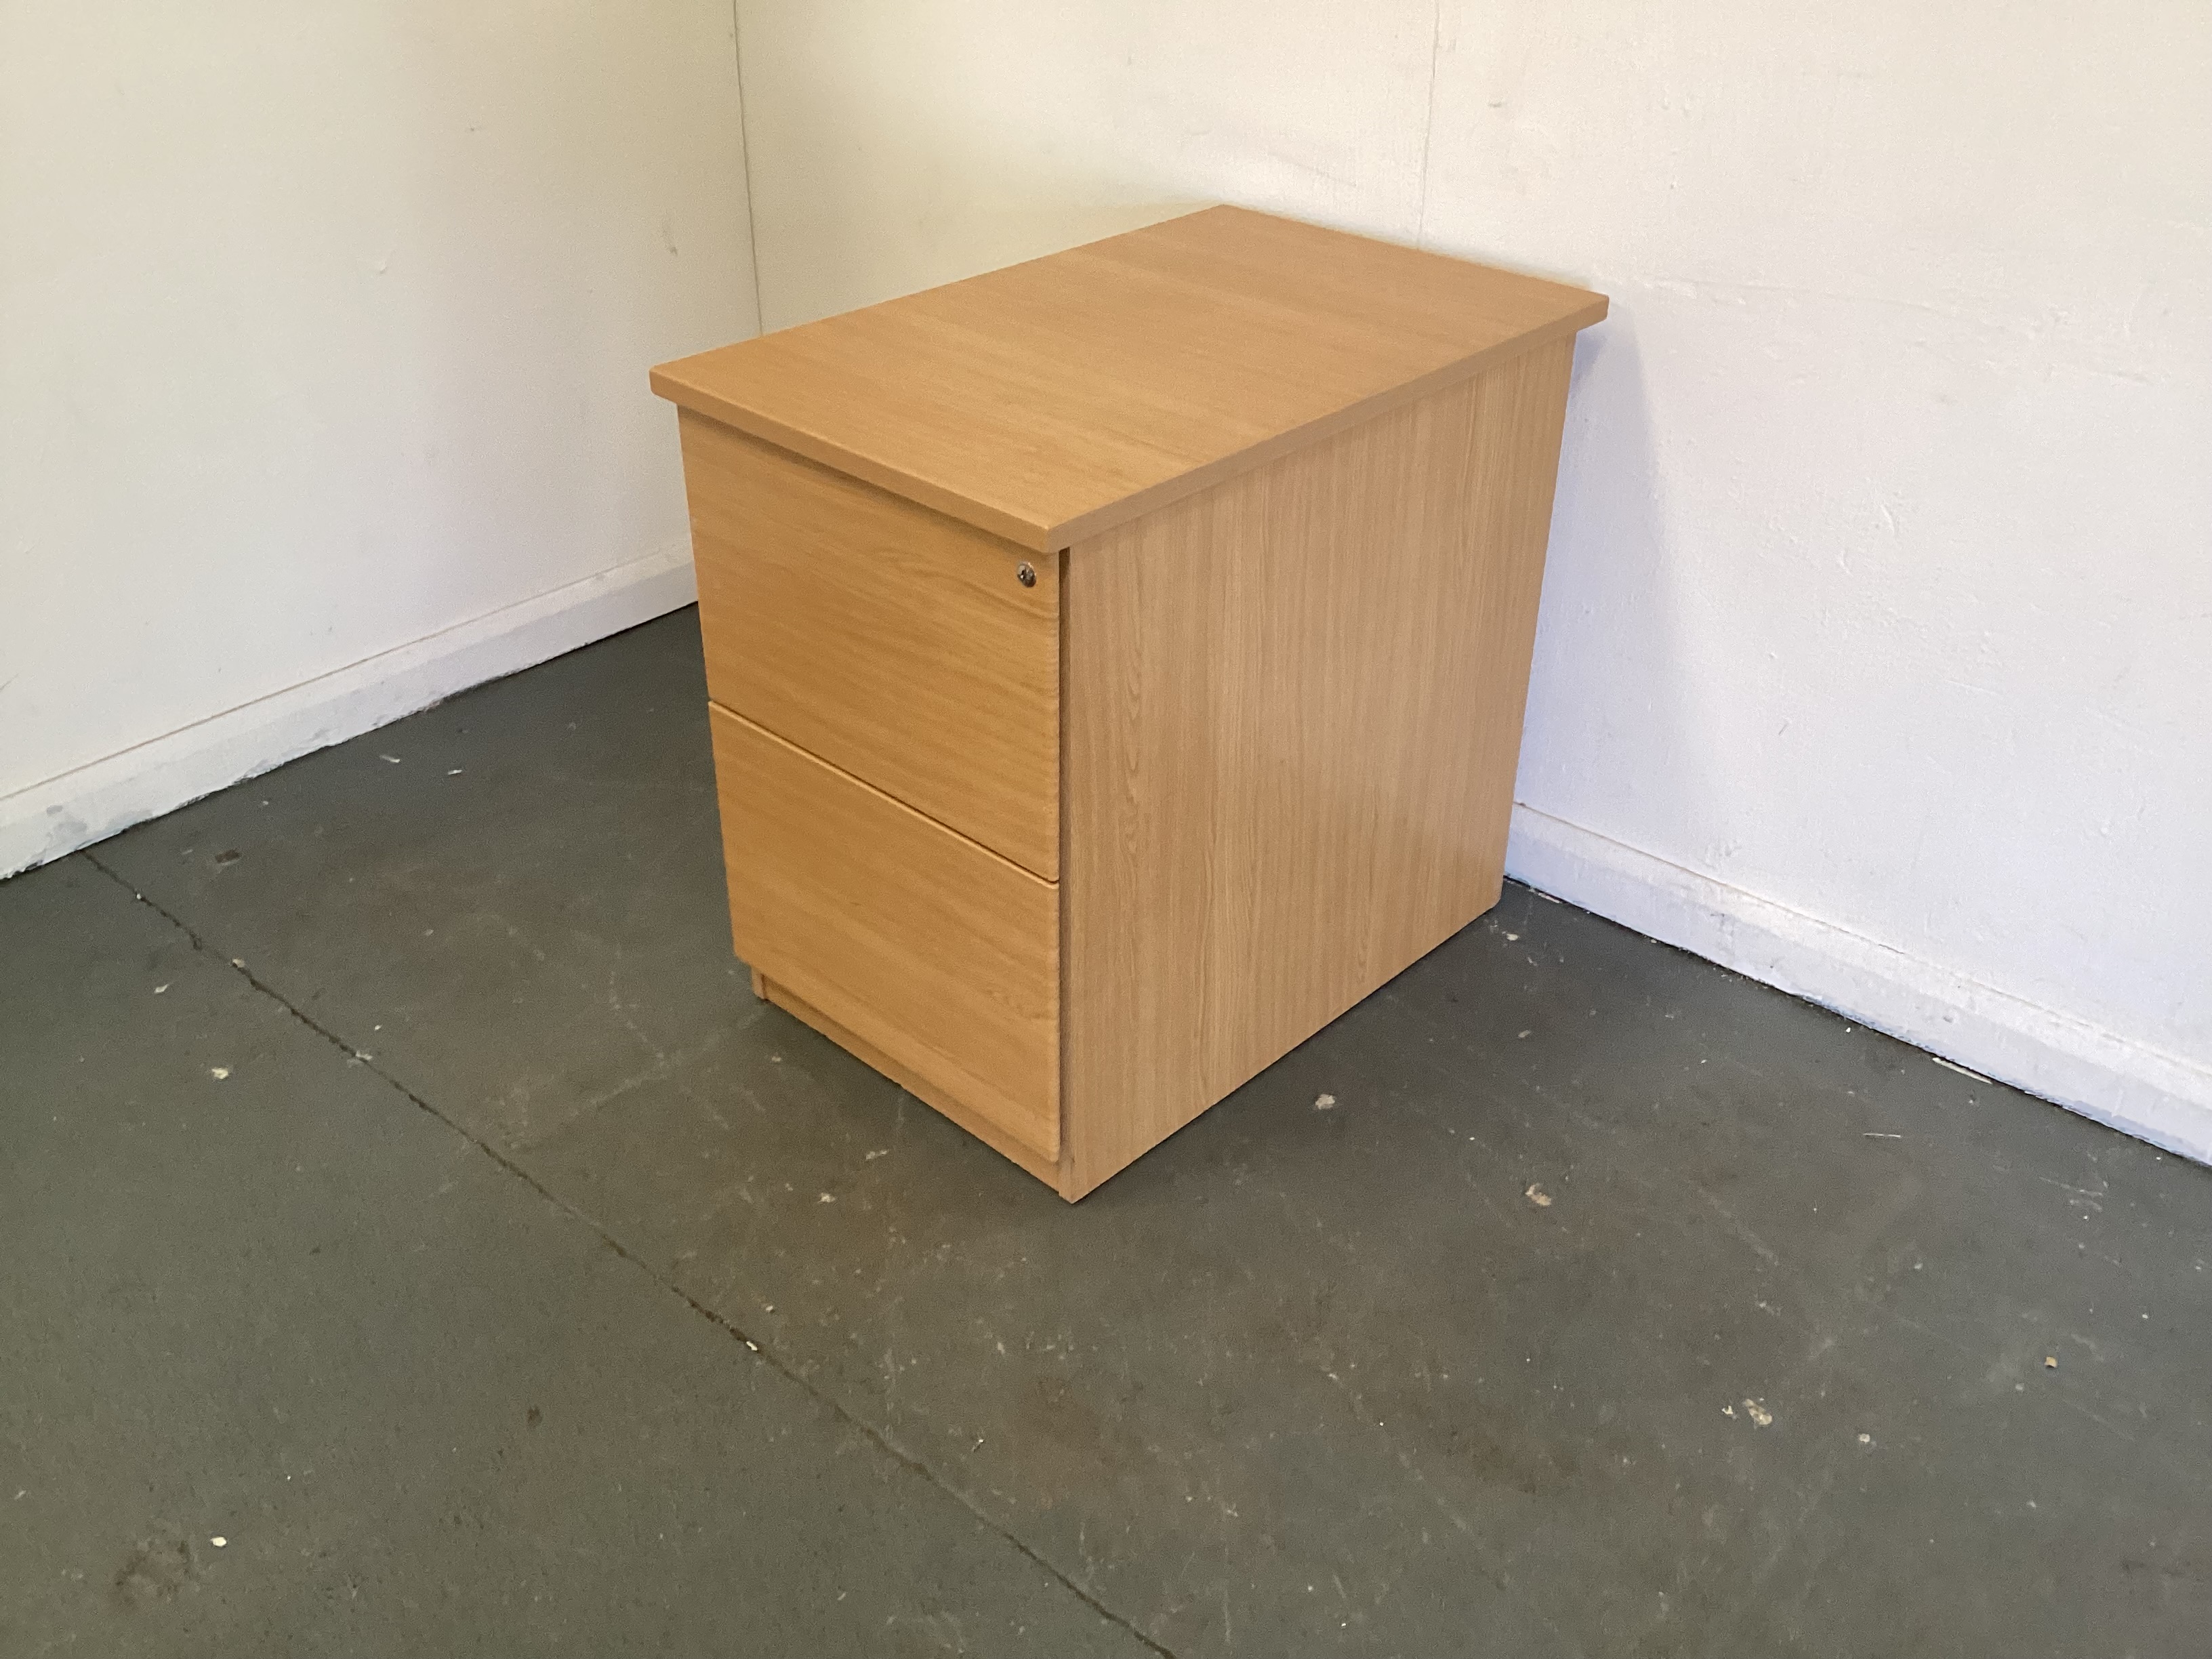    Wooden Filing Cabinet